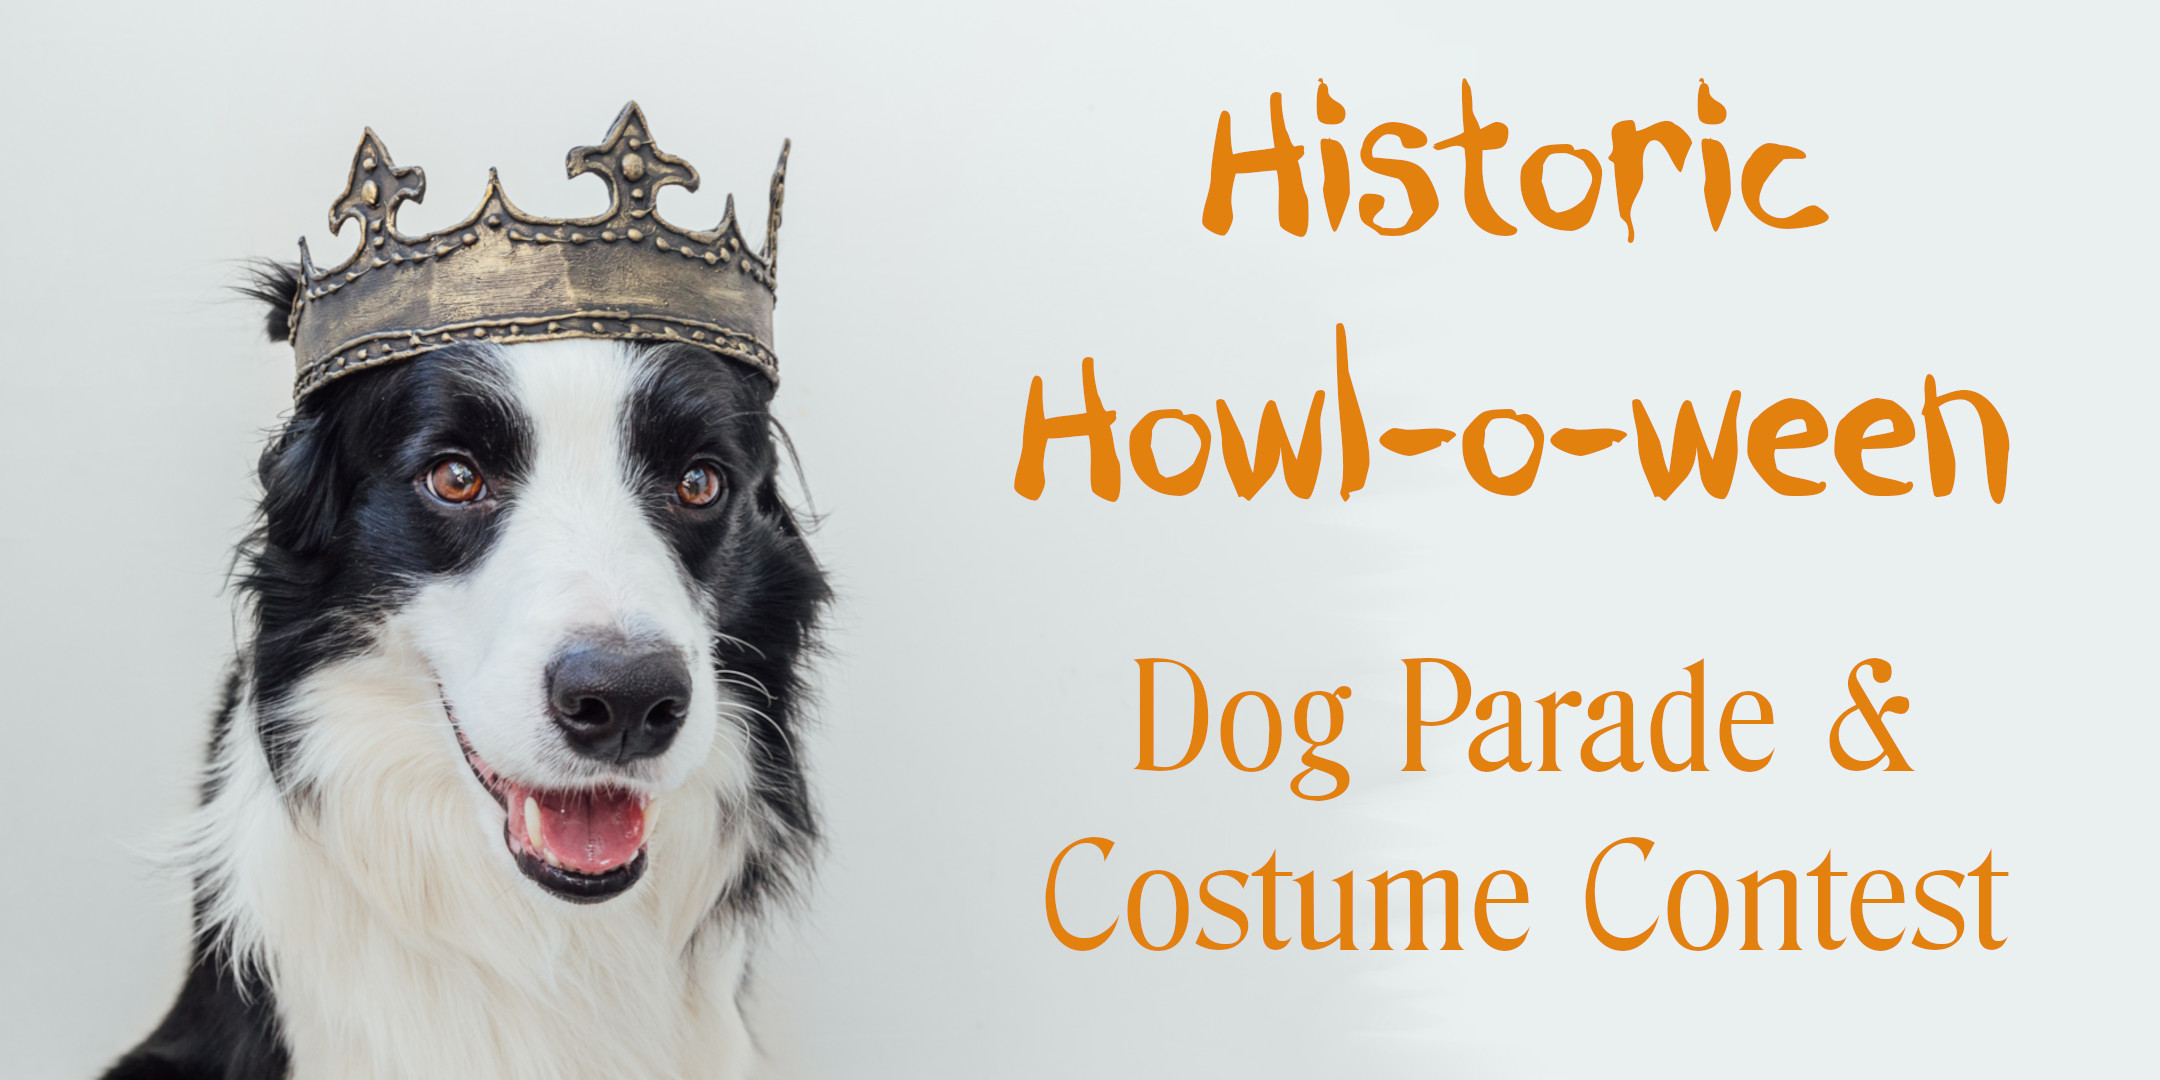 Thumbnail for the post titled: Historic Howl-O-Ween